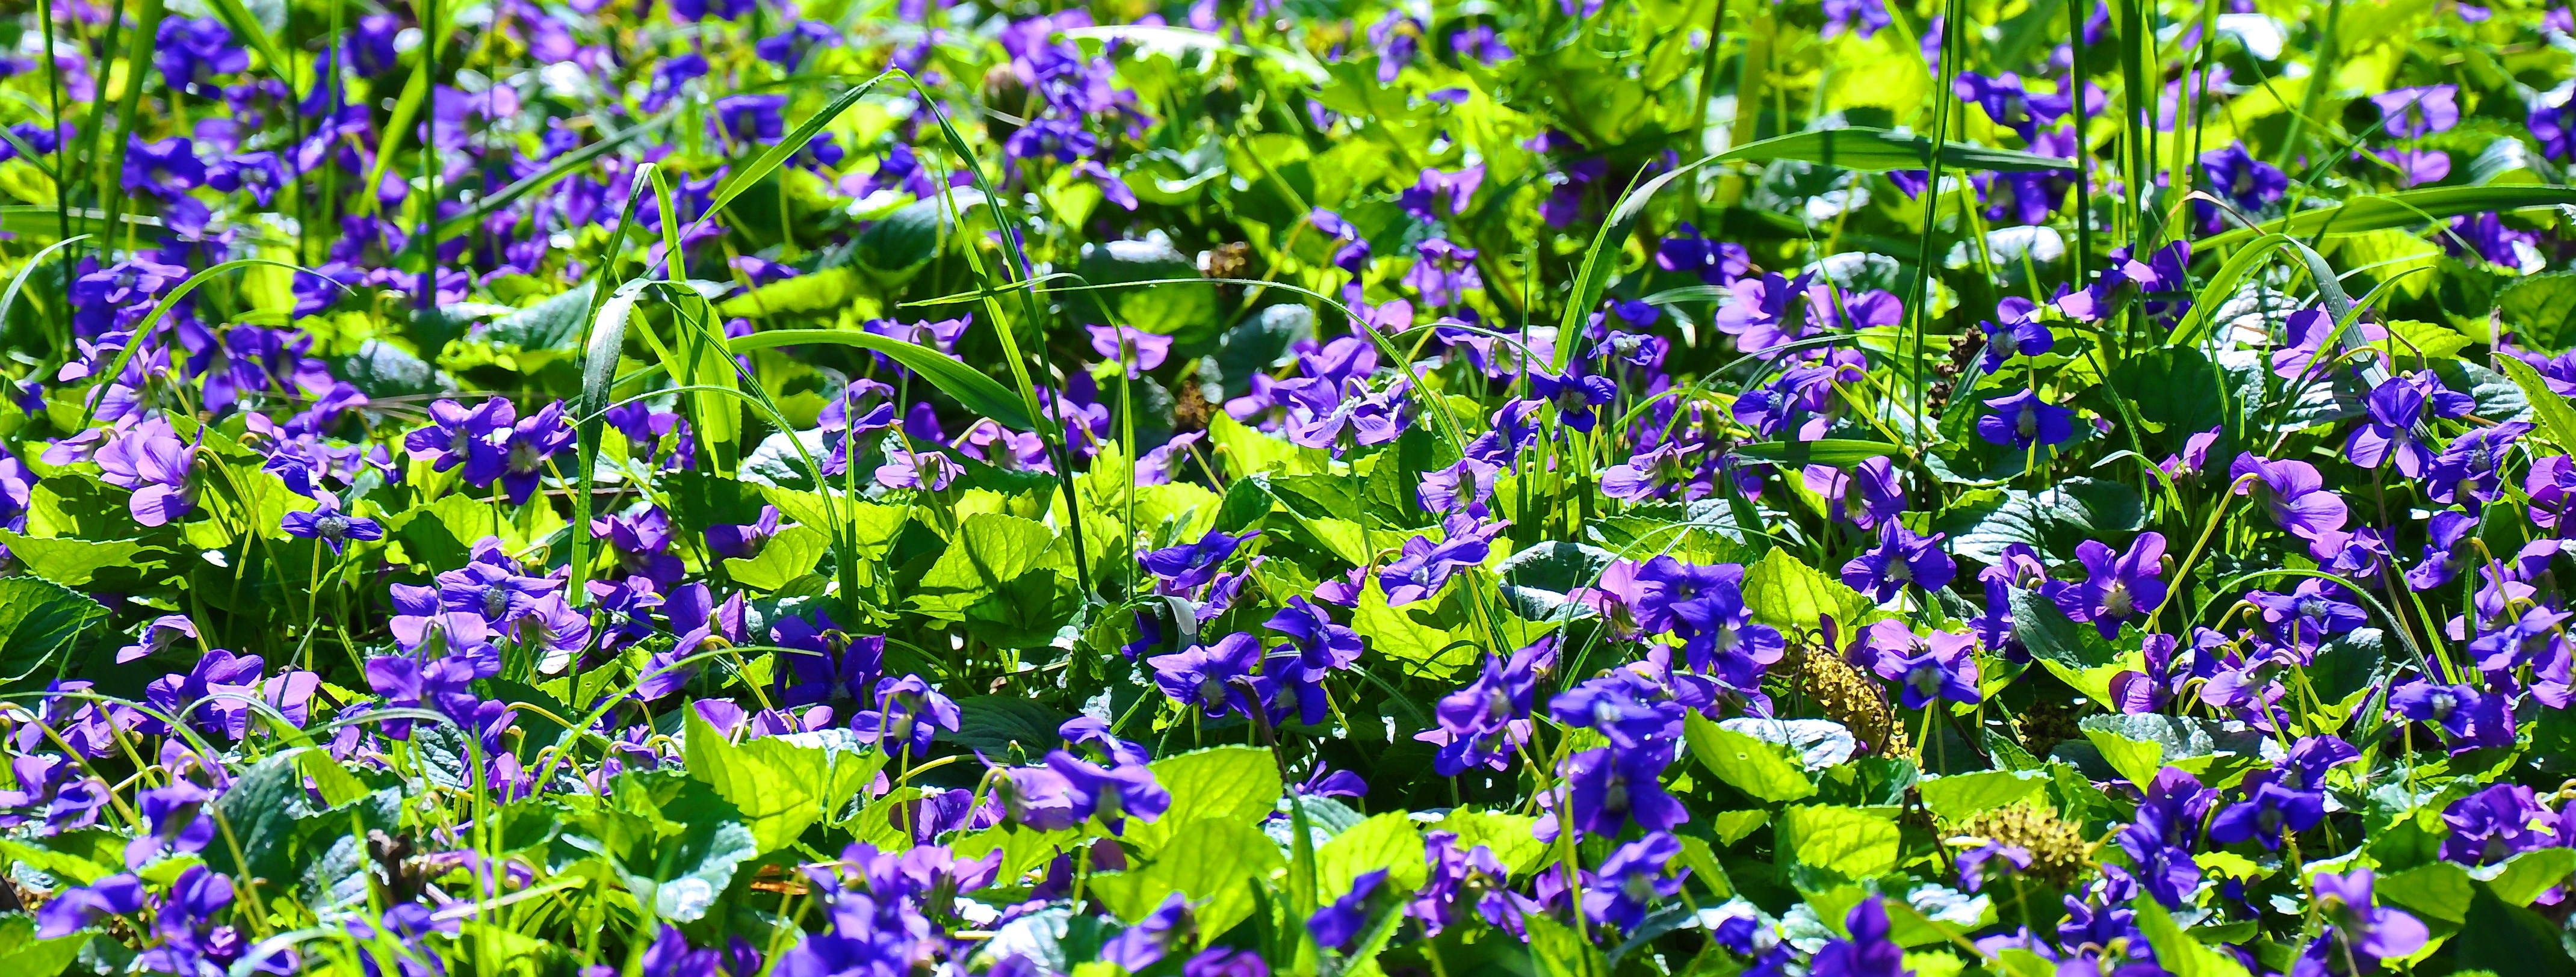 green and purple flower